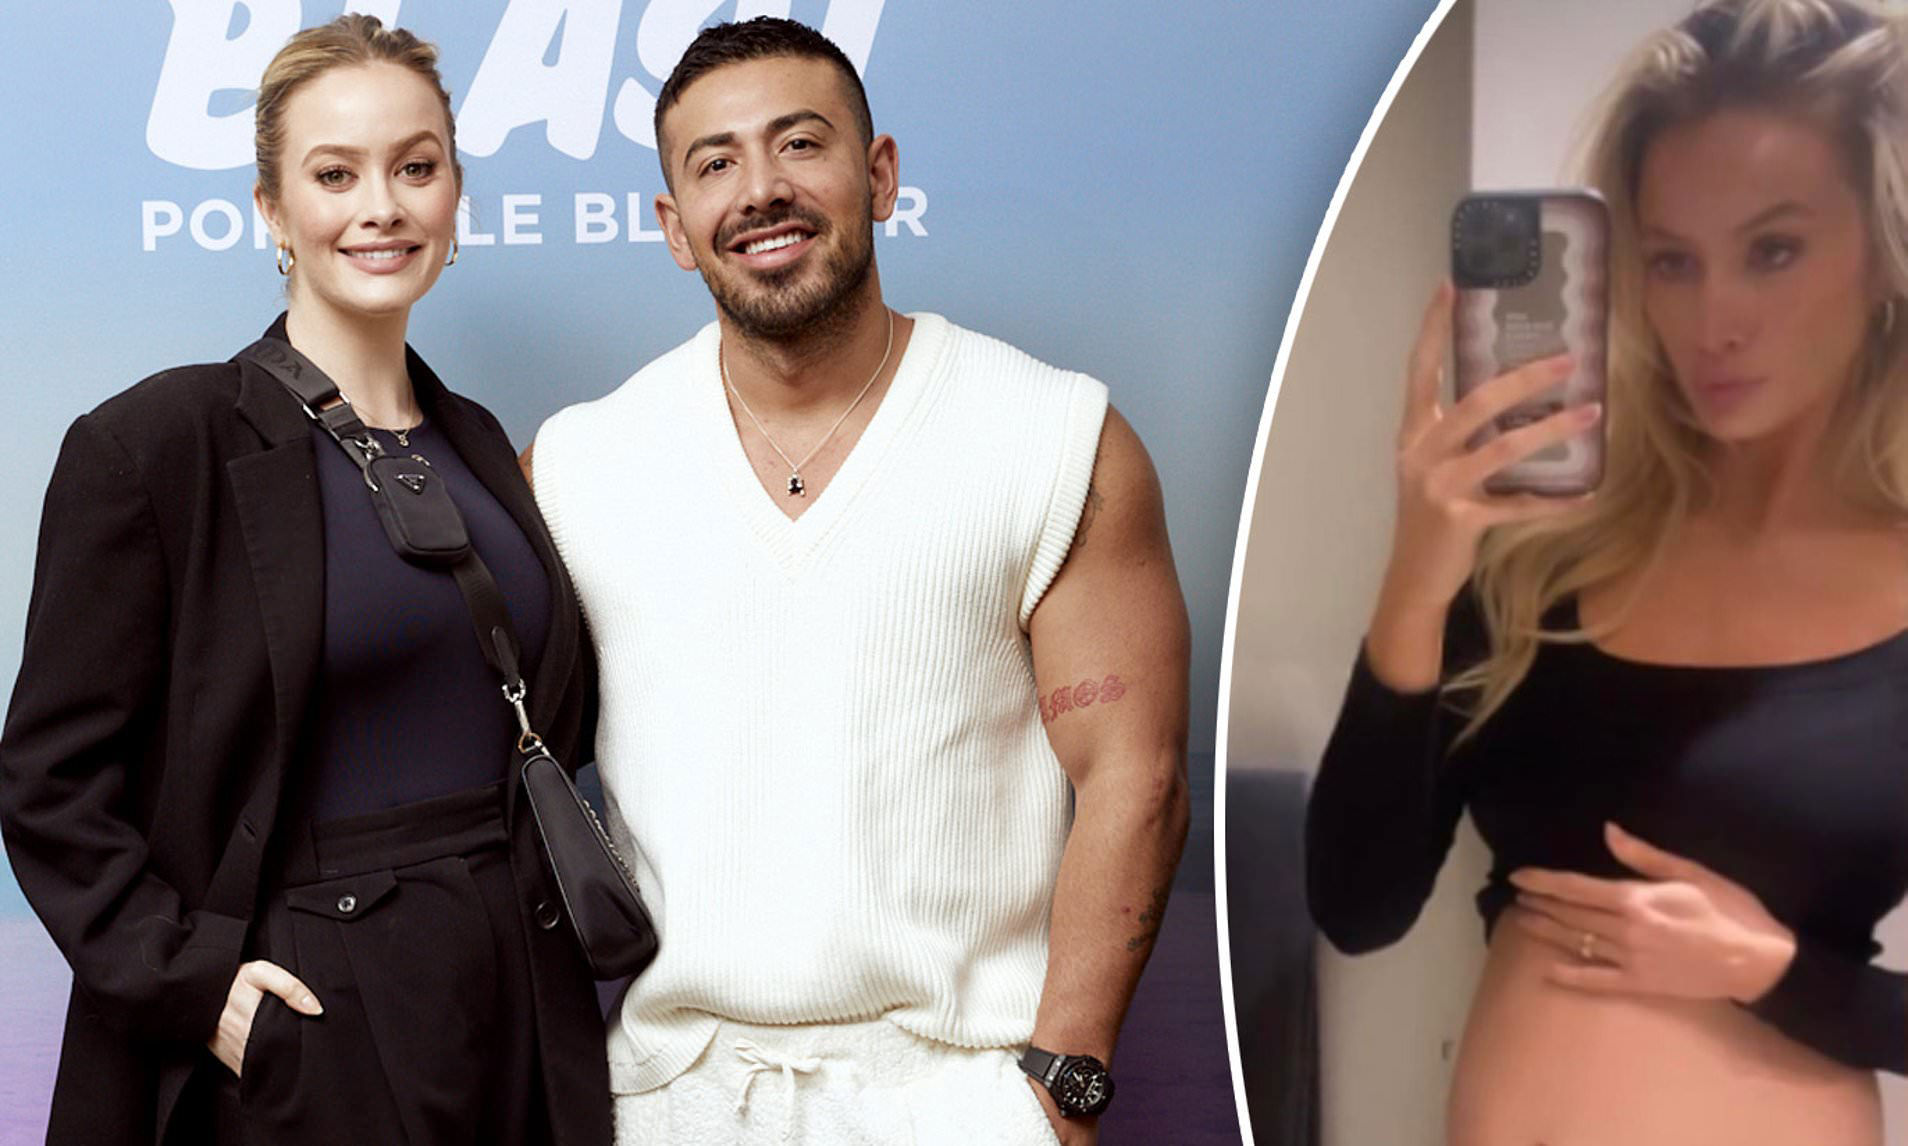 Pregnant Simone Holtznagel is radiant with Jono at event